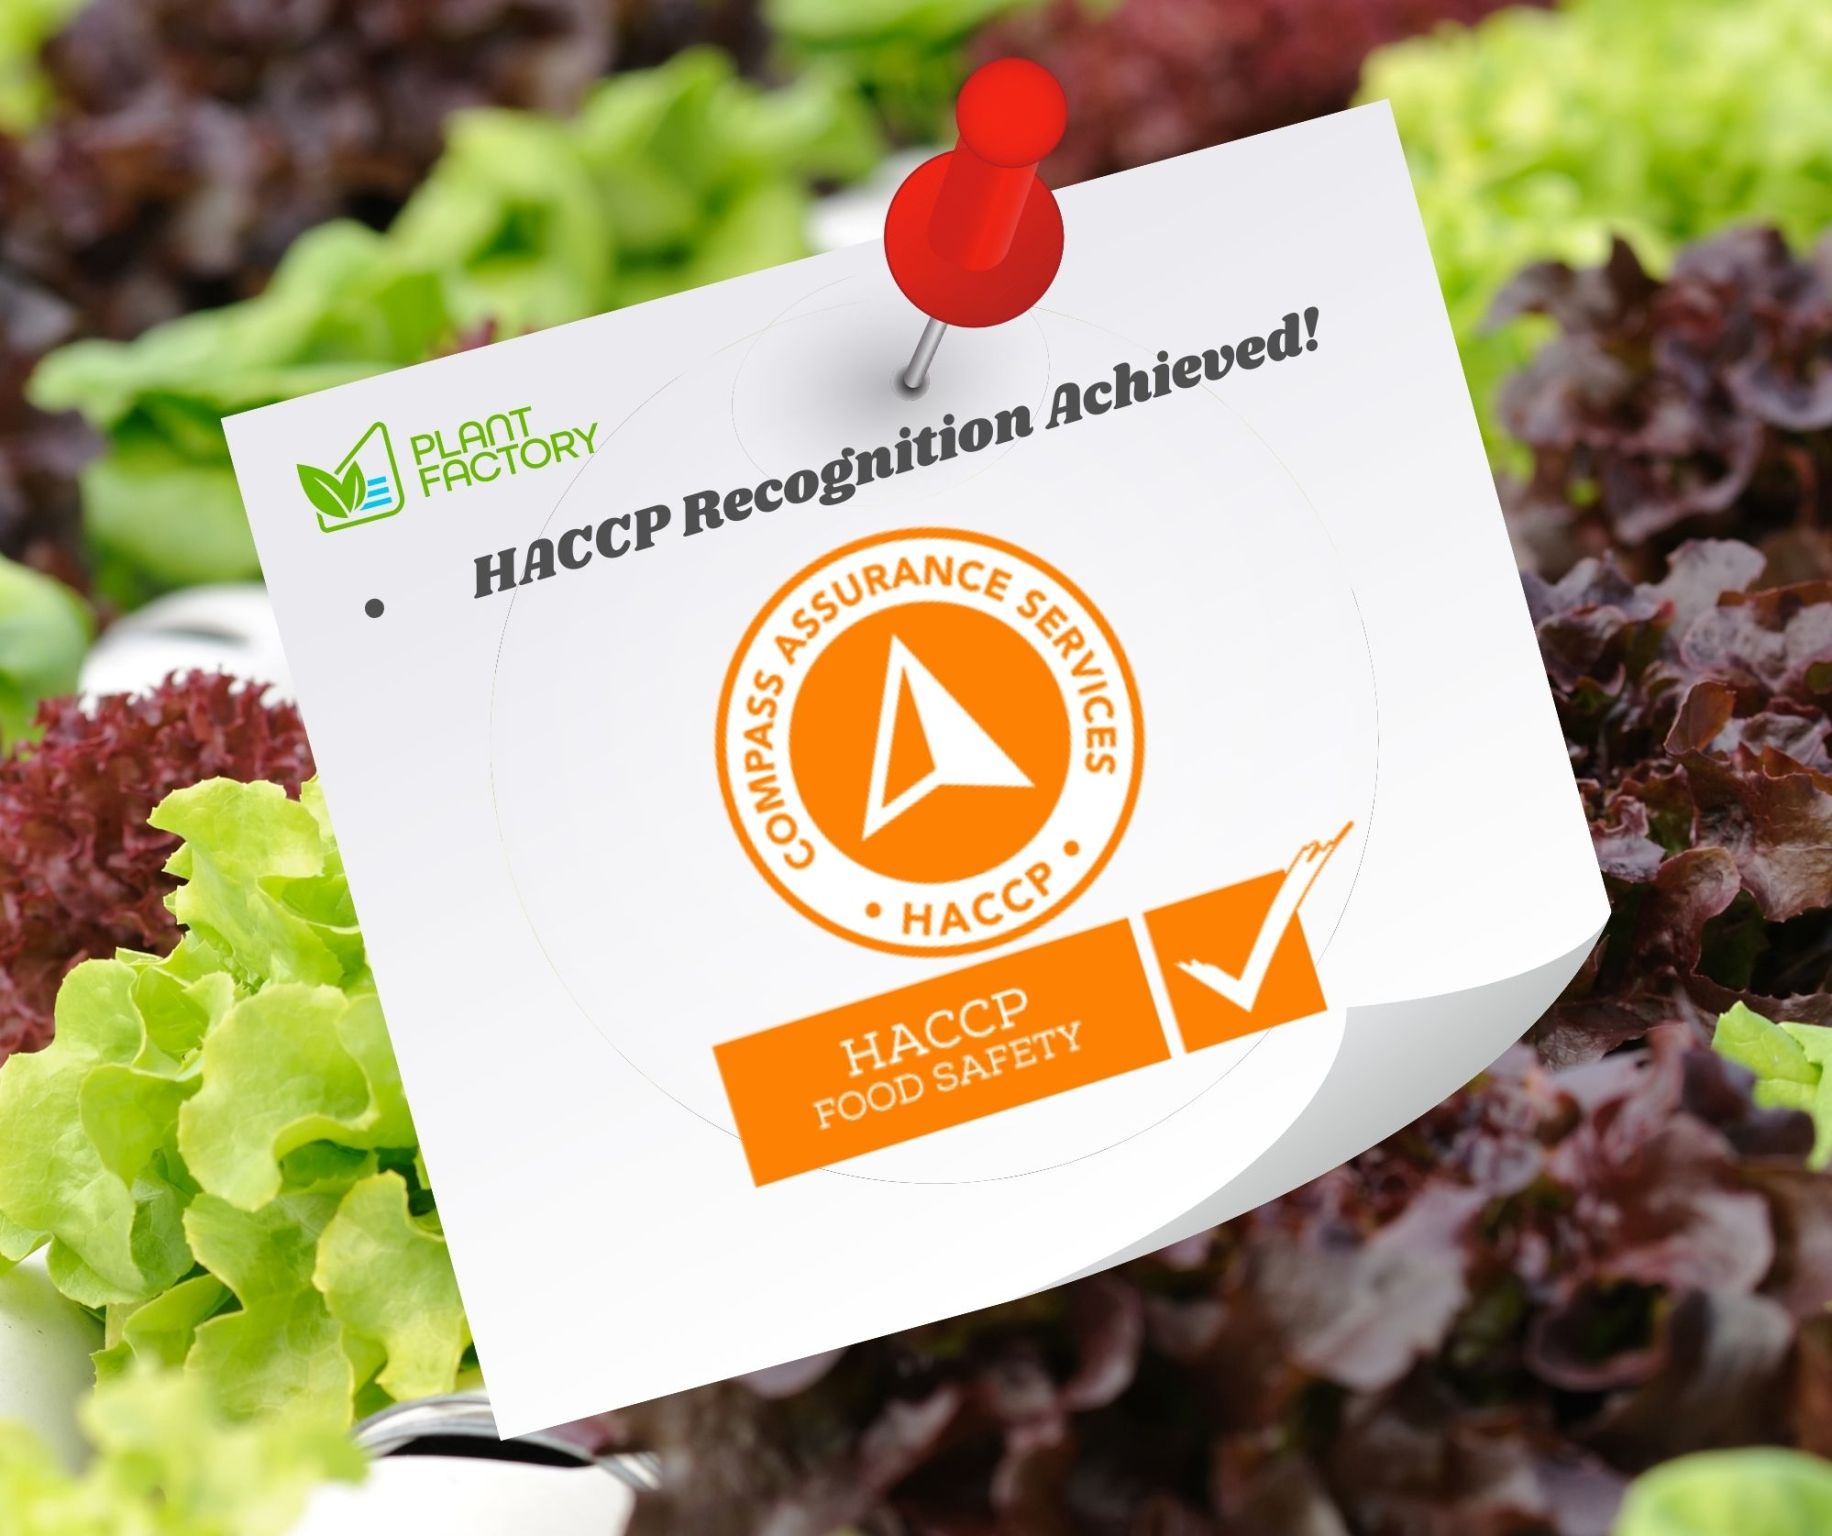 Plant Factory Achieves HACCP Recognition: Promising Safe and Quality Produce Every Step of the Way